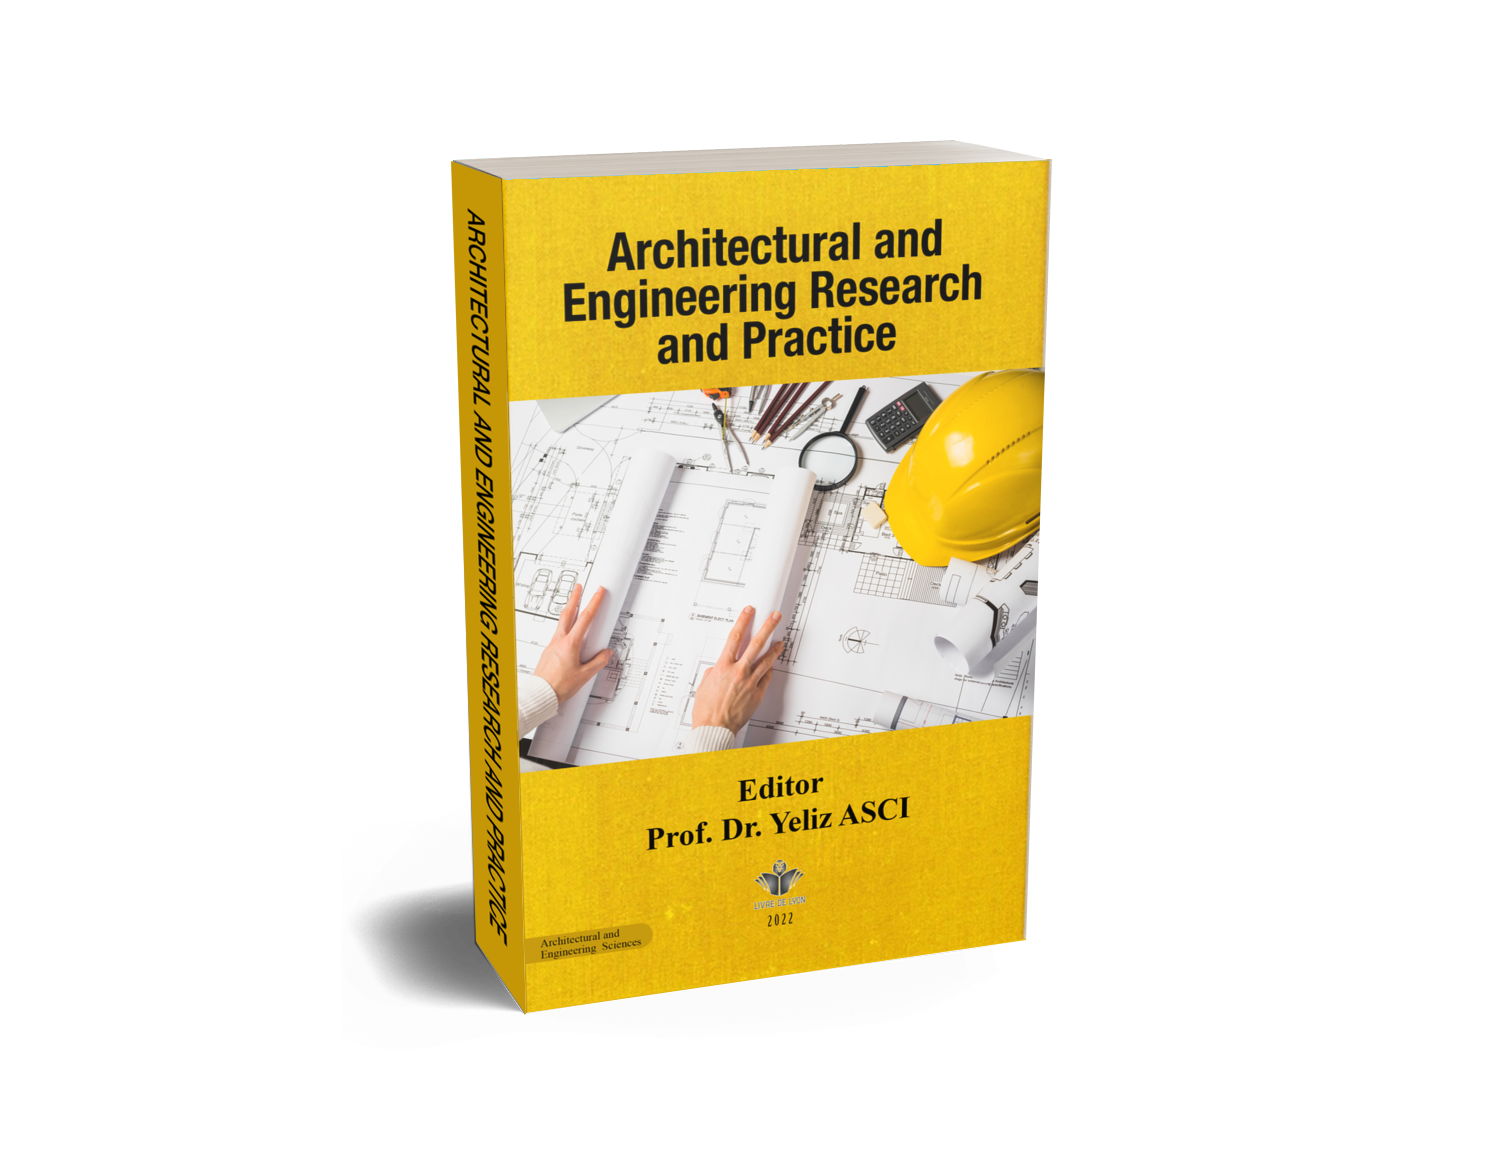 Architectural and Engineering Research and Practice